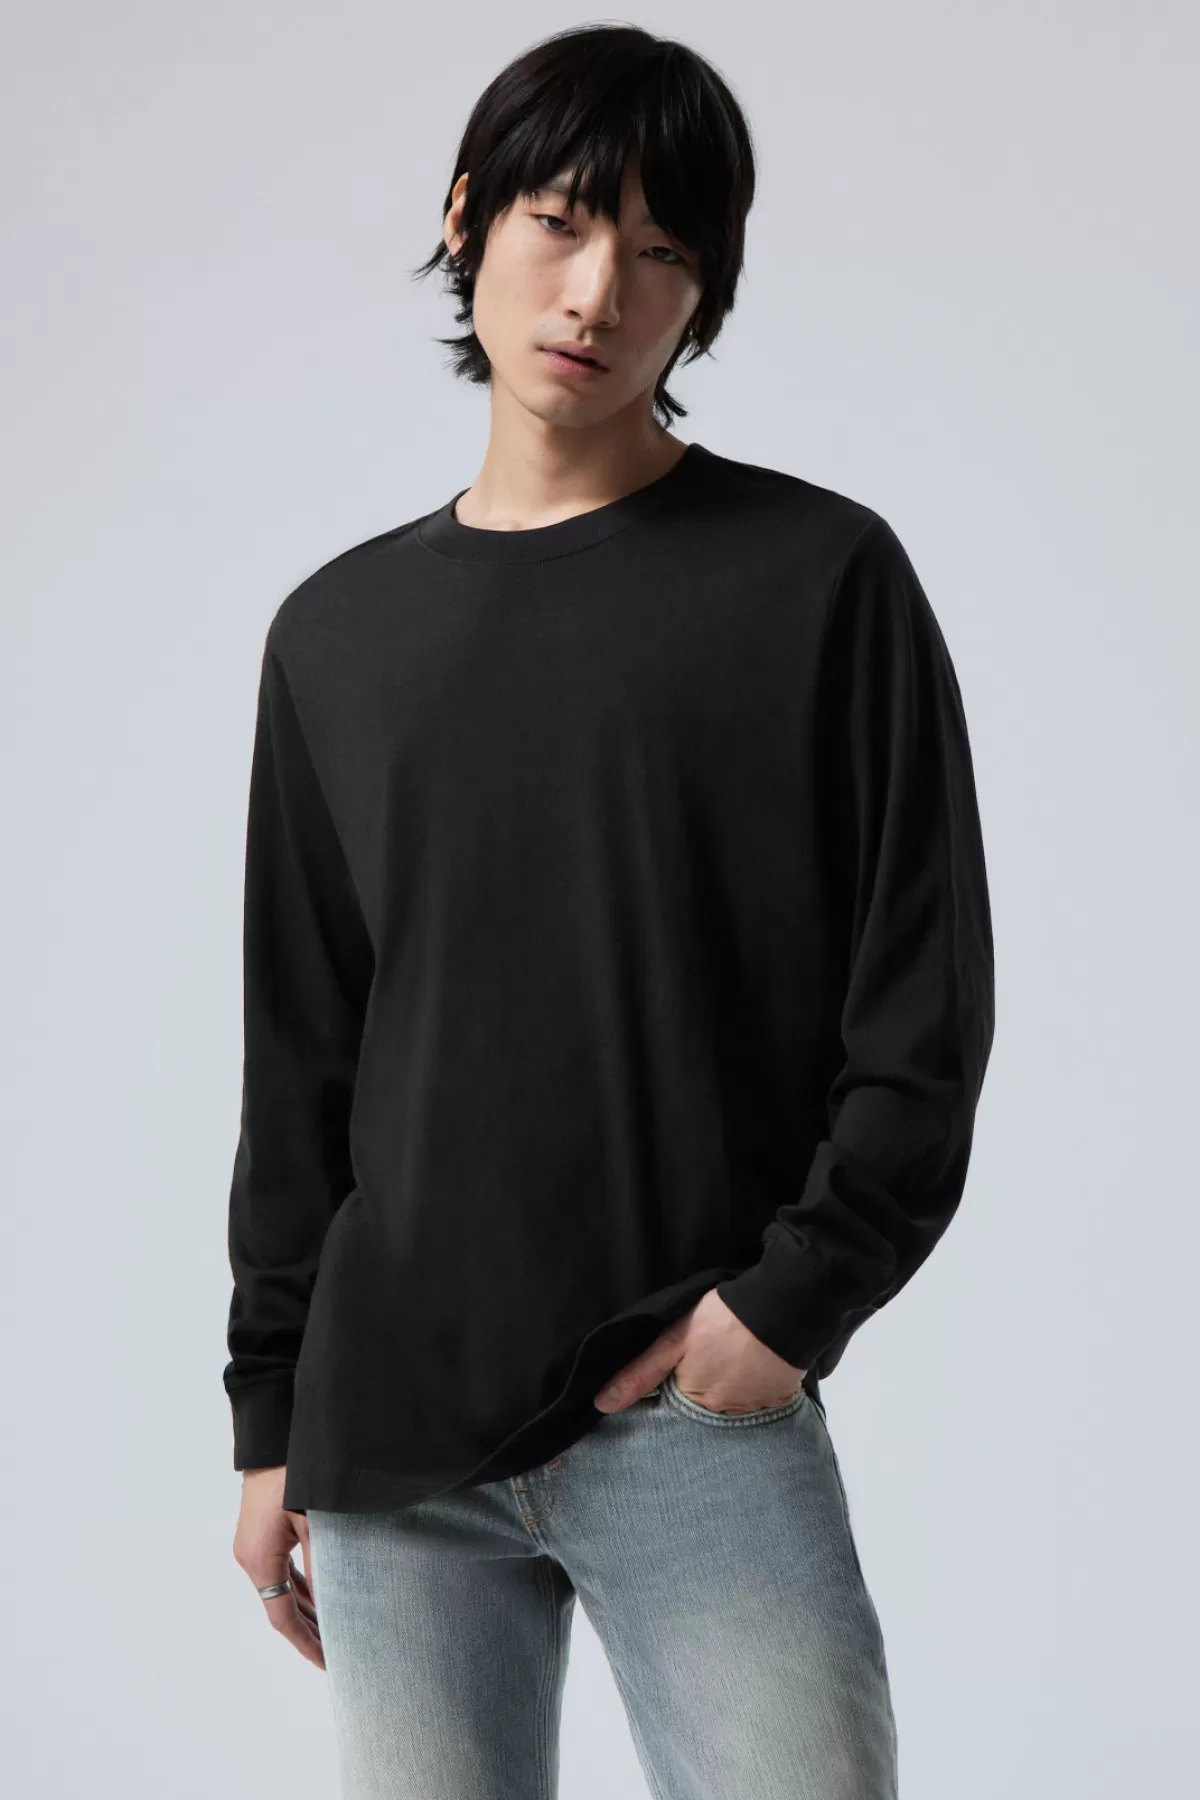 Weekday Relaxed Midweight Long Sleeve Black Sale